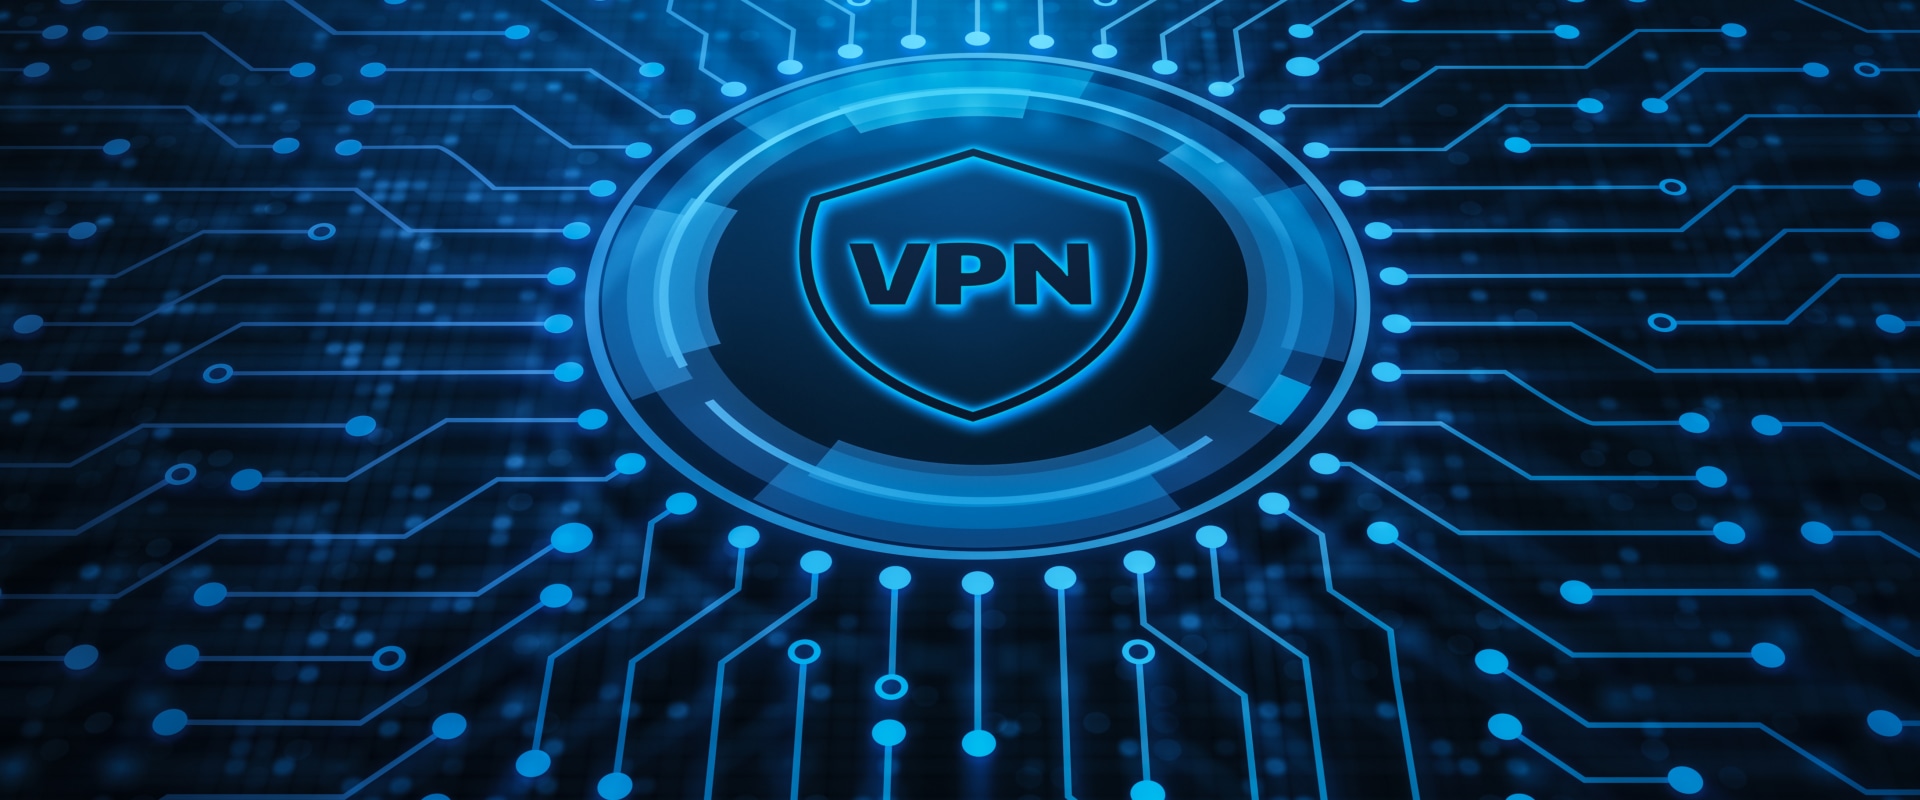 Affordable VPNs That Still Provide Quality Service